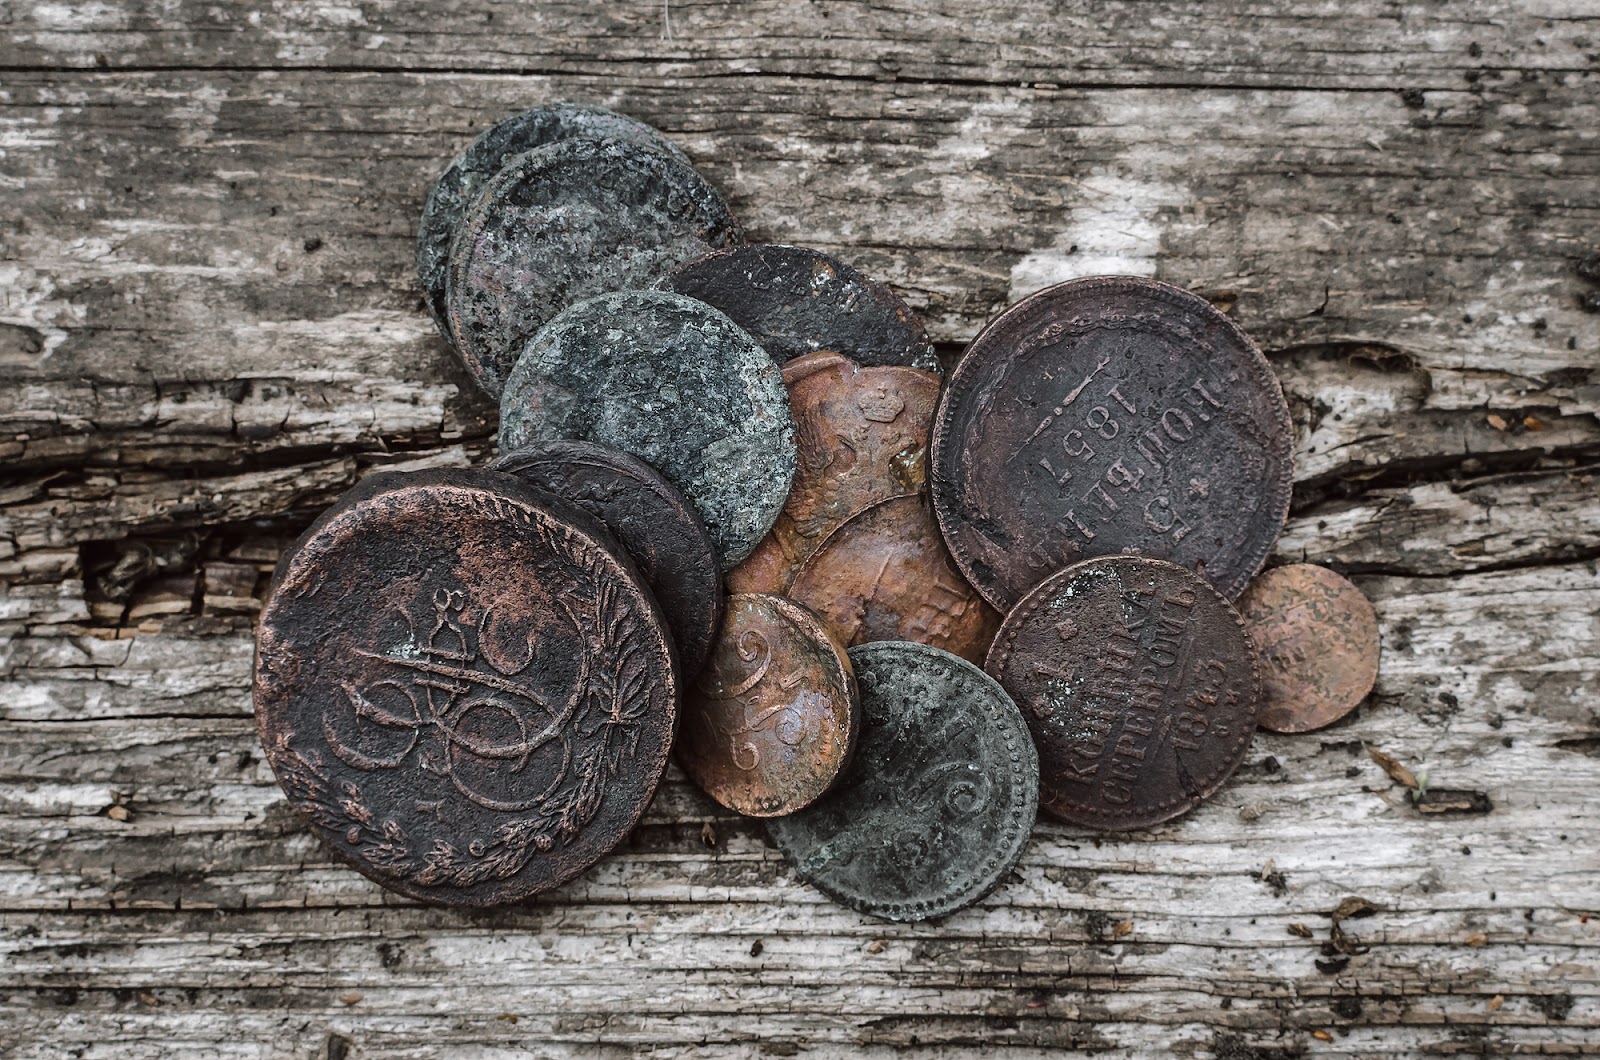 How To Clean Coins Without Devaluing Them [DIY Hack] 